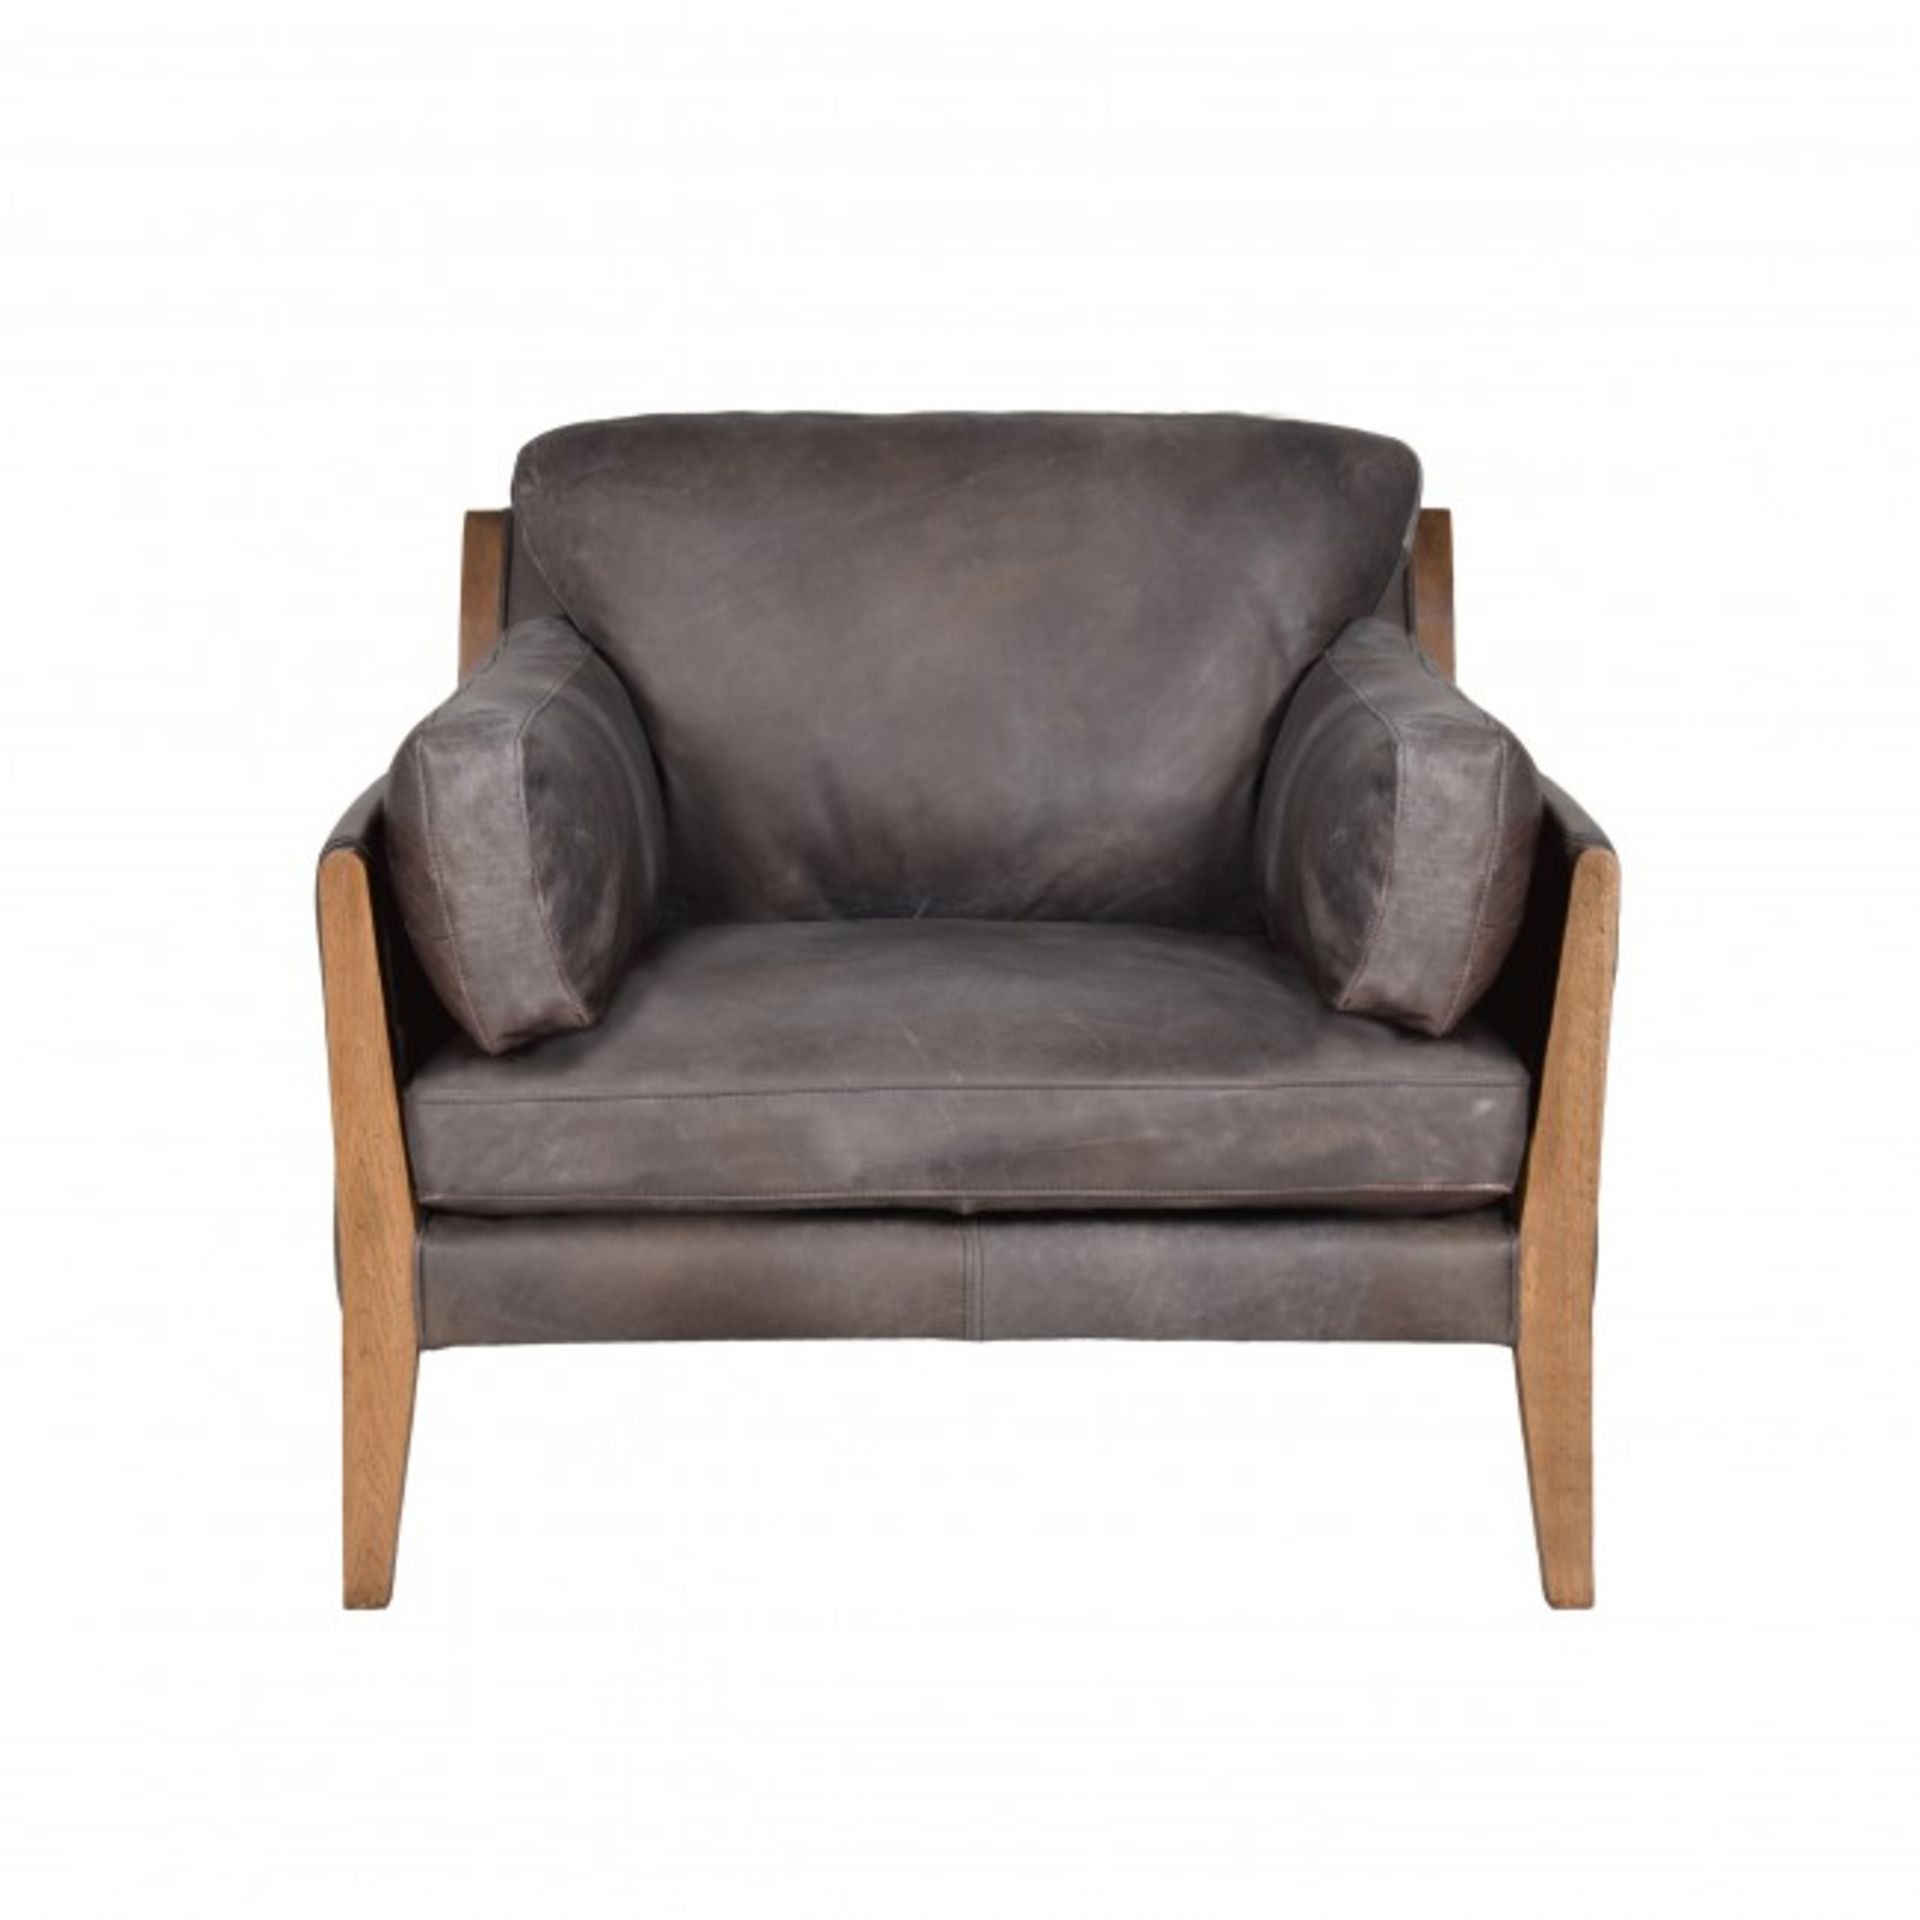 Loffee Sofa 1 Seater Sioux Charcoal Leather The Loffee Range Has Been Inspired By Scandivian